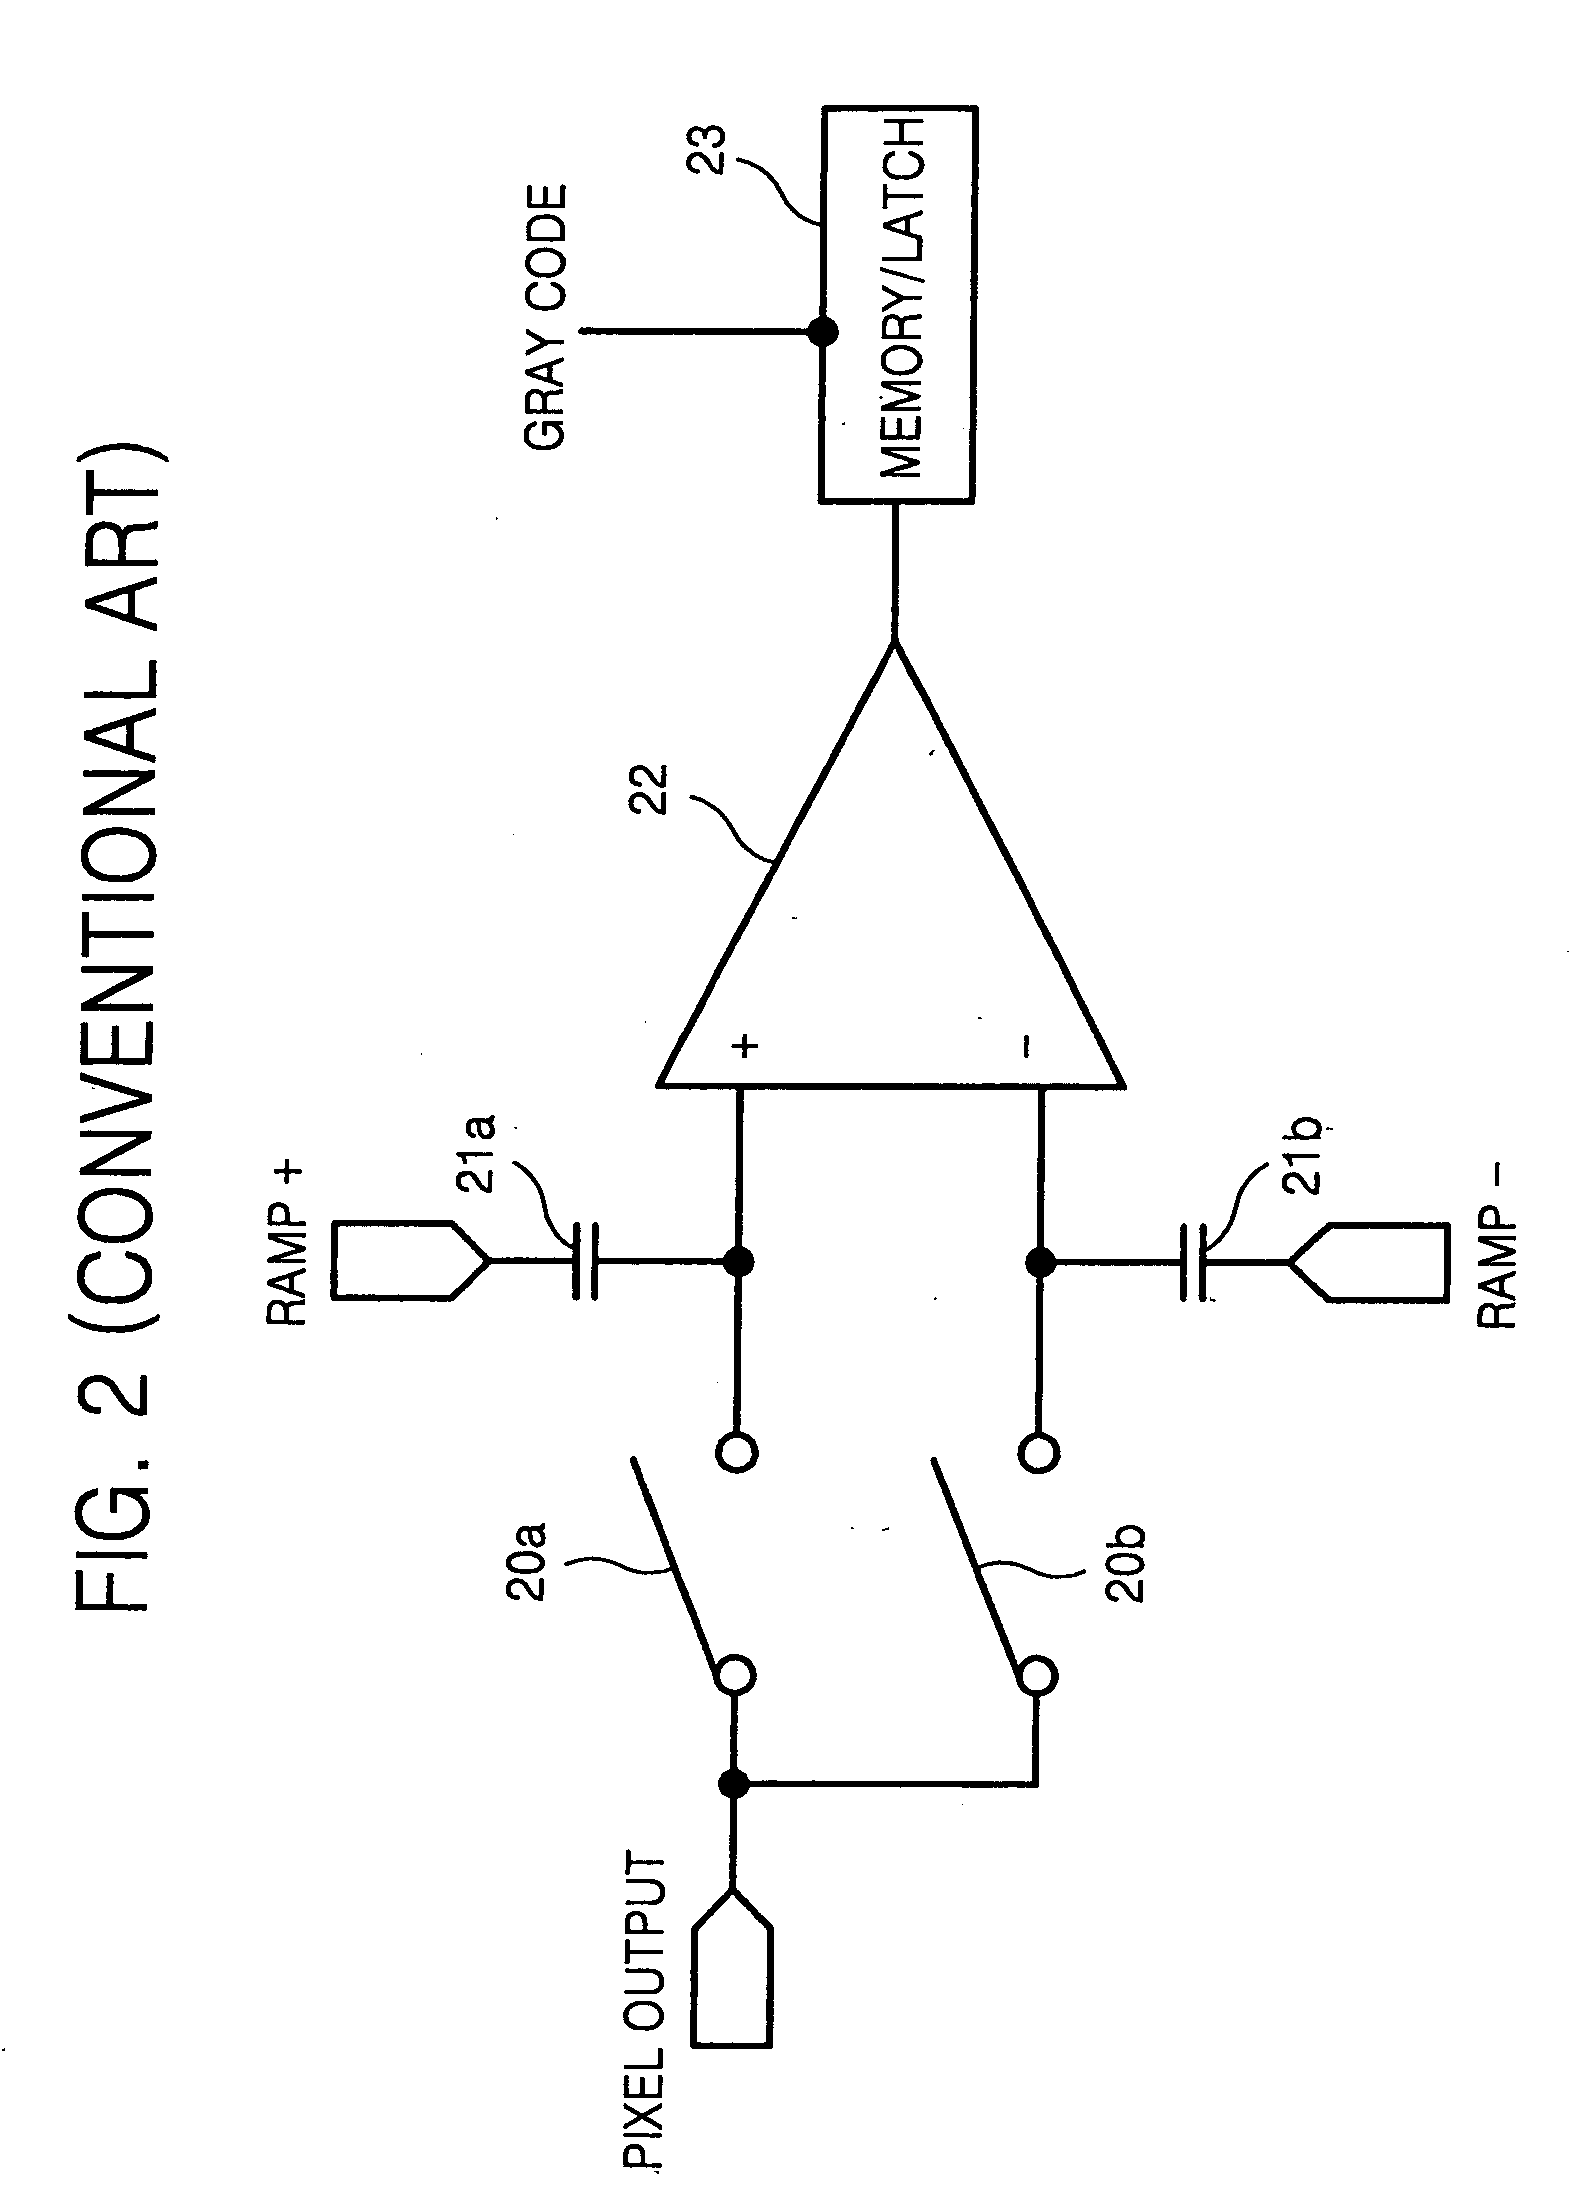 Offset correction during correlated double sampling in CMOS image sensor